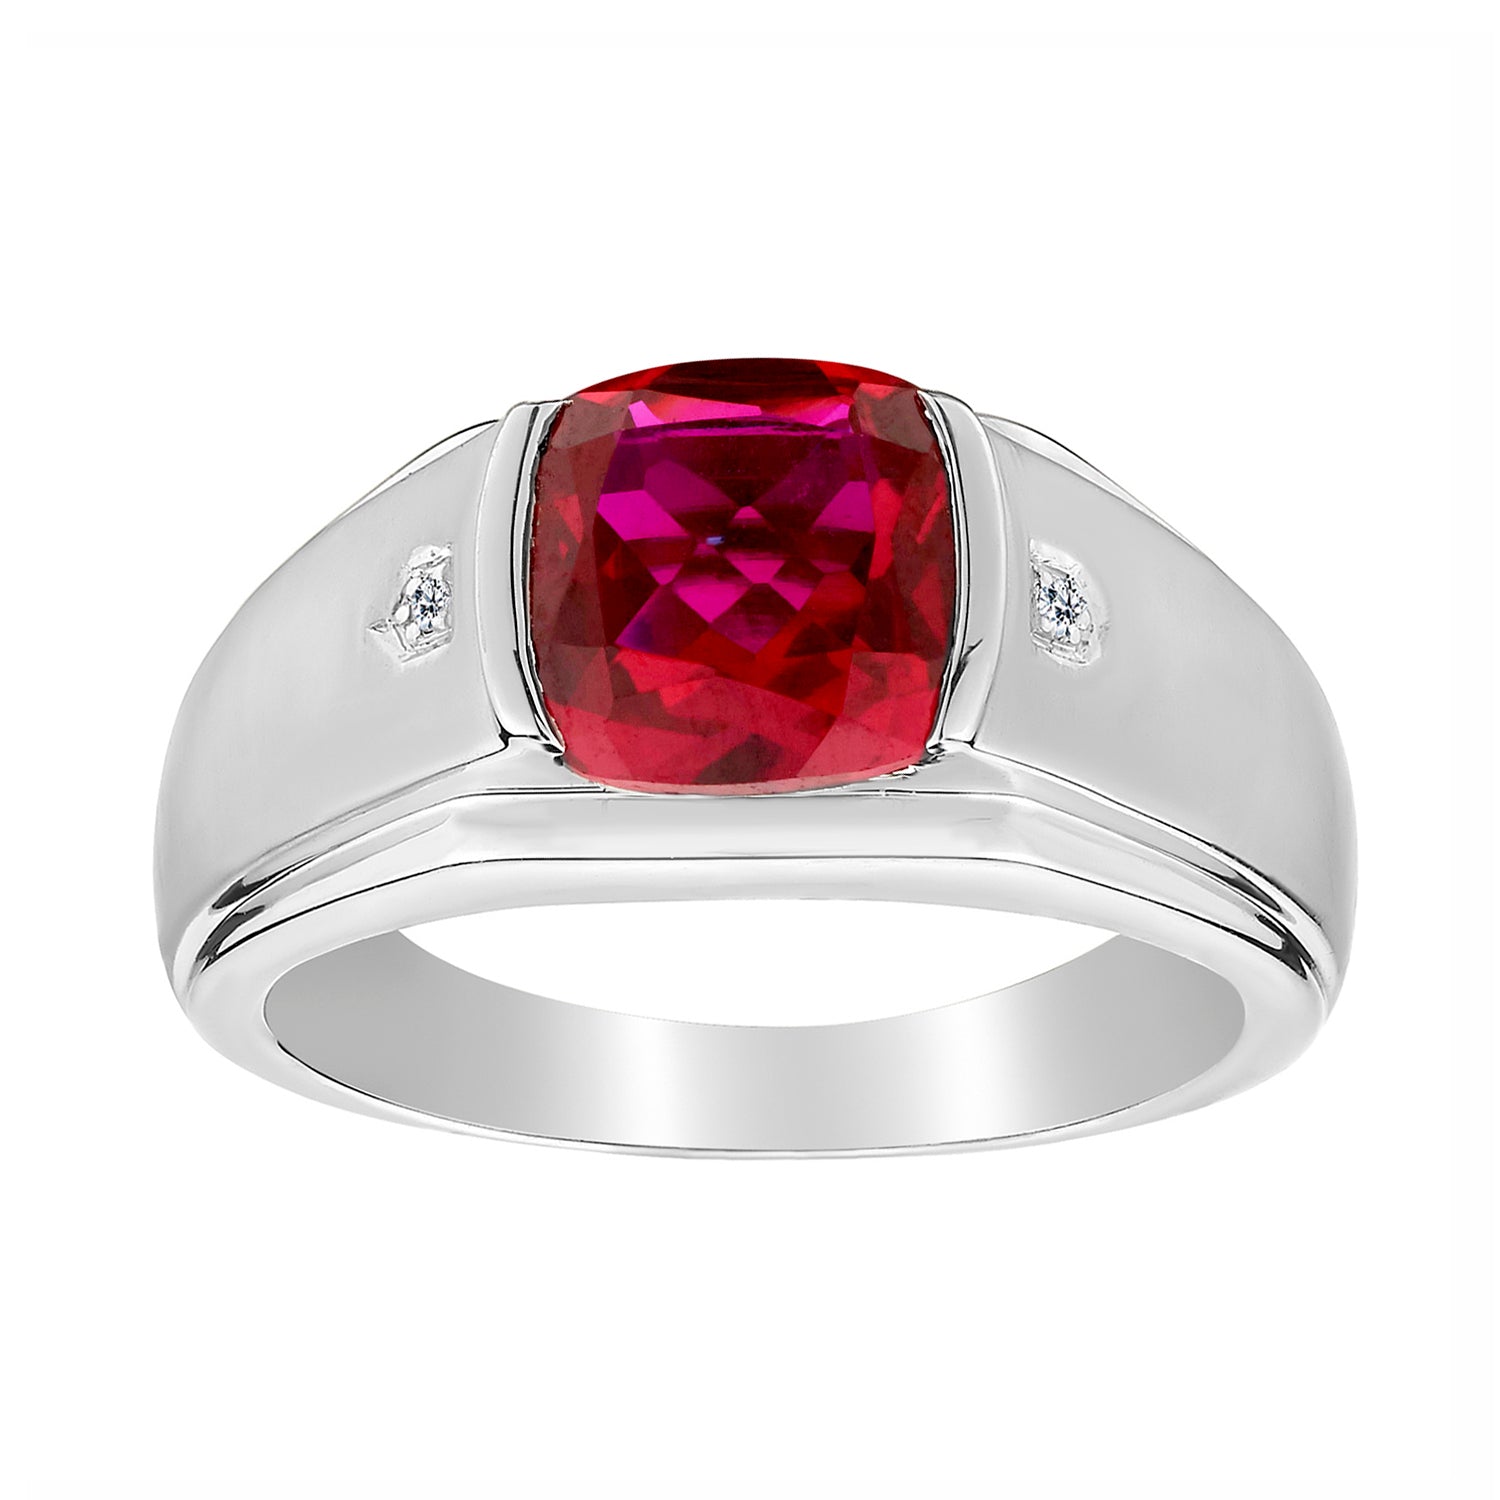 .015 CARAT DIAMOND AND CREATED RUBY GENTLEMAN'S RING, SILVER. Men’s Rings. - Griffin Jewellery Designs